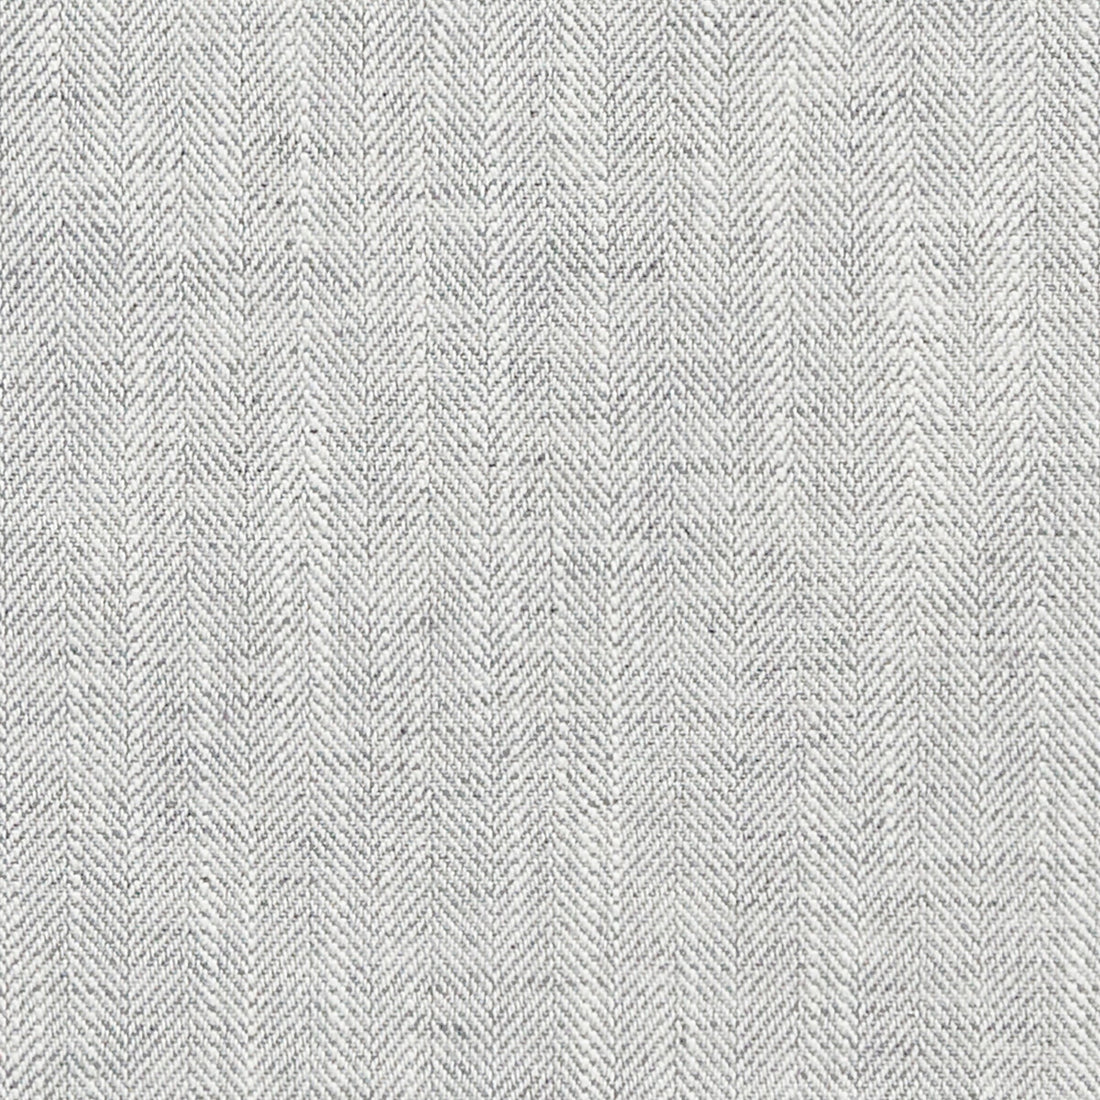 Mataru fabric in grey color - pattern 35763.11.0 - by Kravet Basics in the Ceylon collection